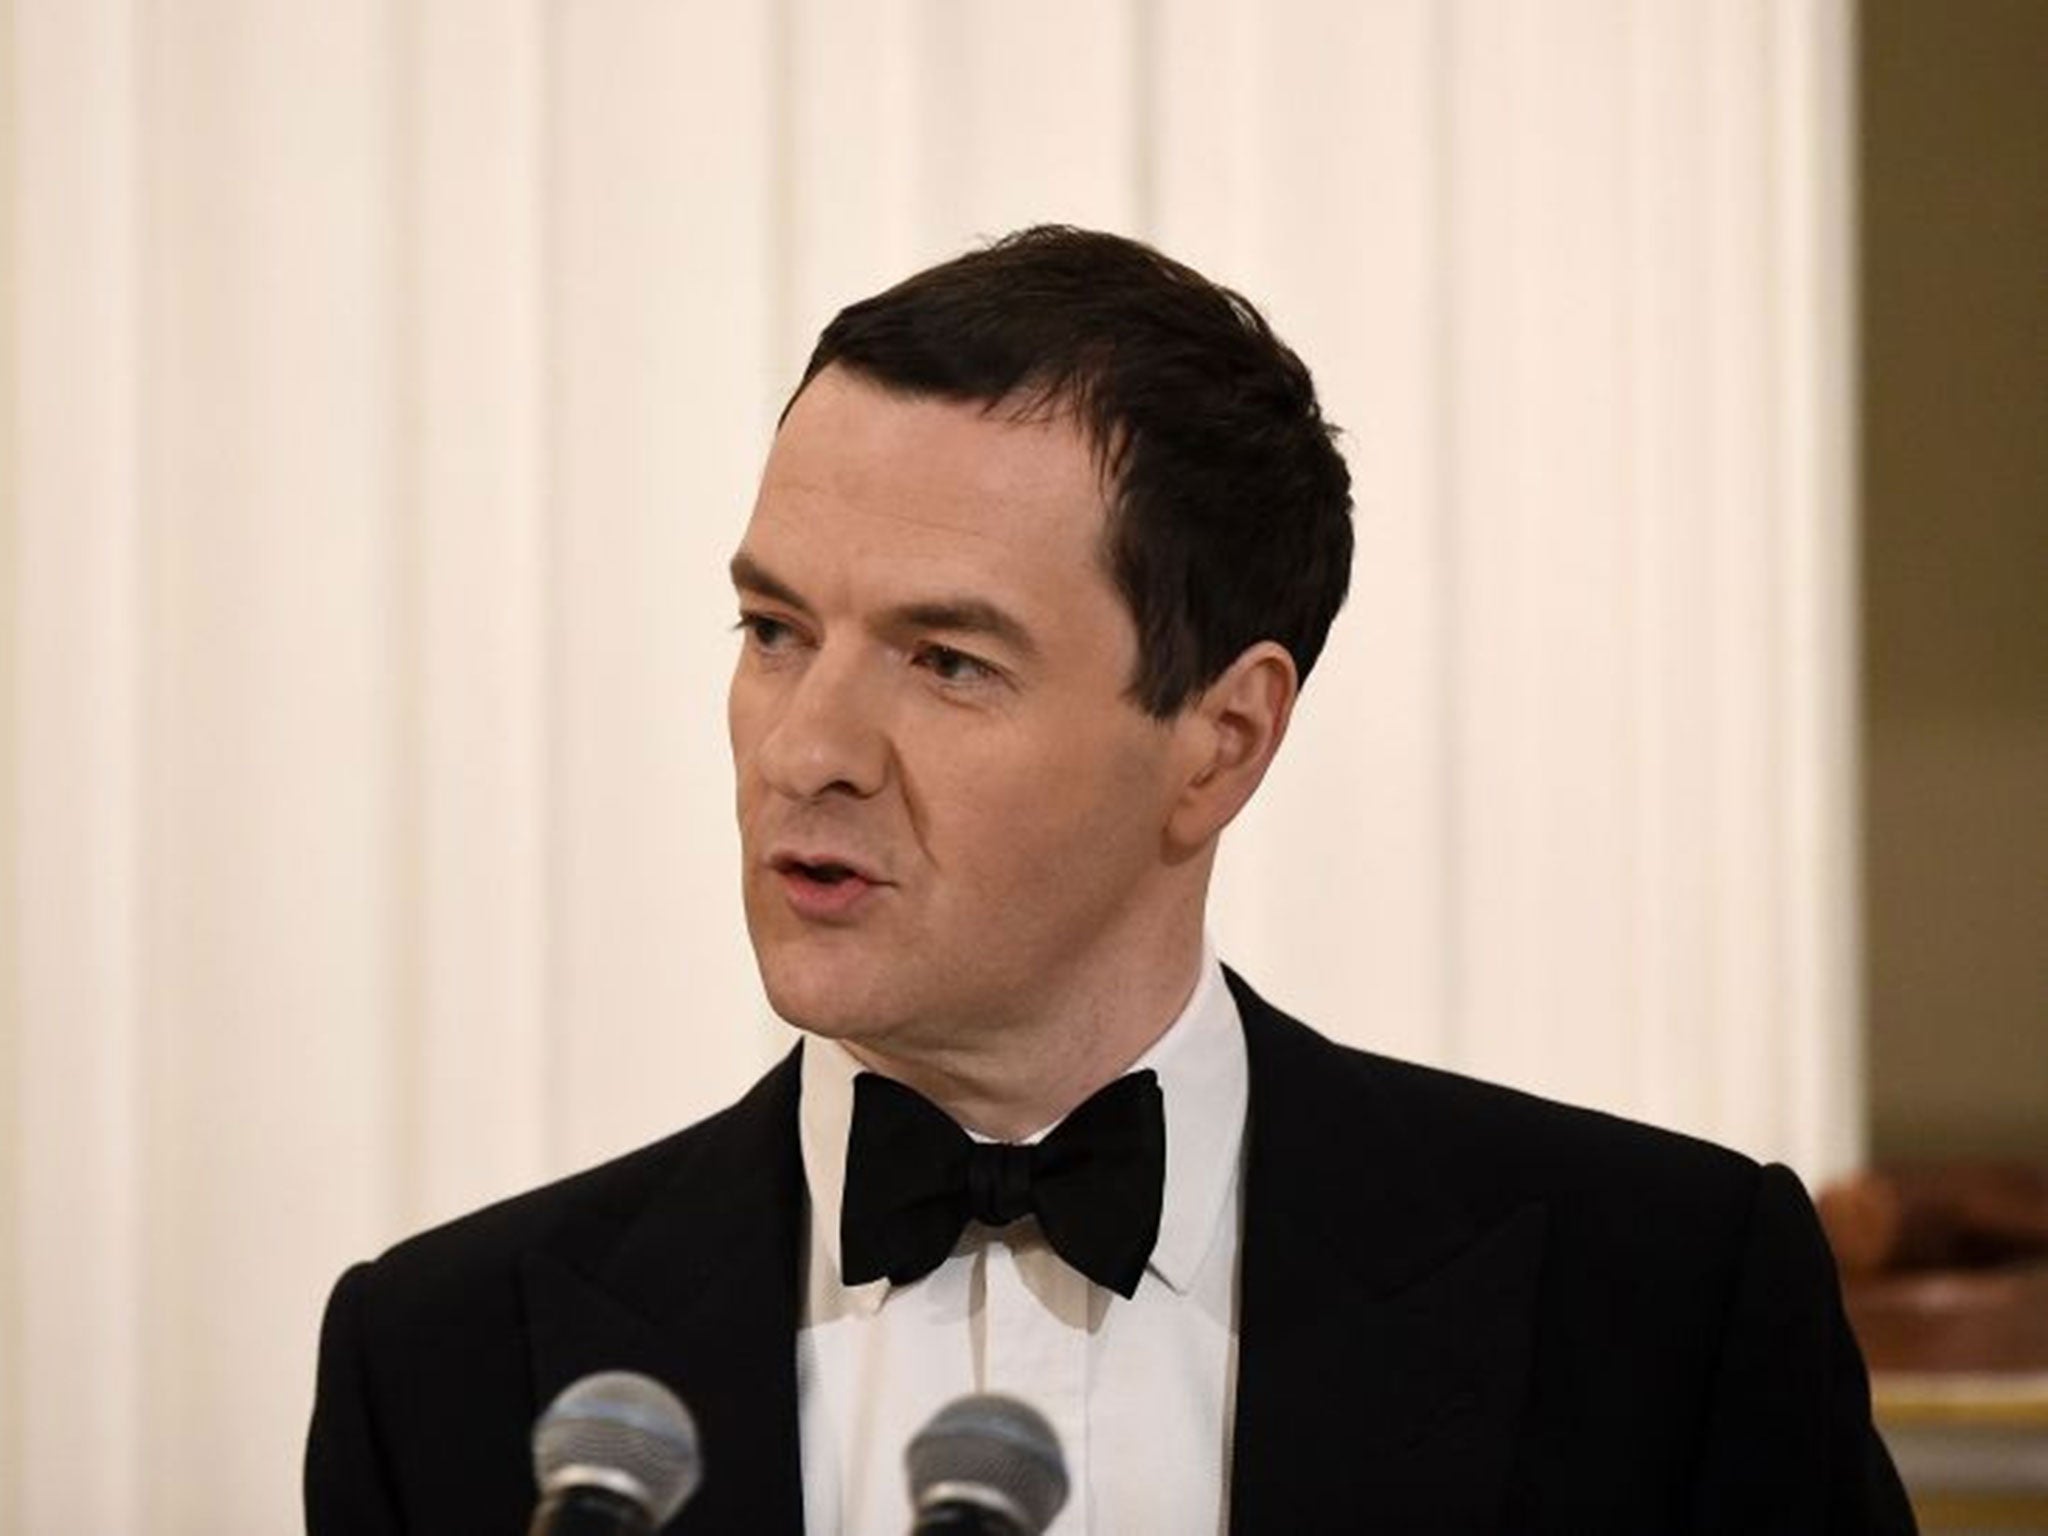 British Chancellor of the Exchequer George Osborne speaks during the Lord Mayor's Dinner to the Bankers and Merchants of the City of London at The Mansion House in London on June 10, 2015.